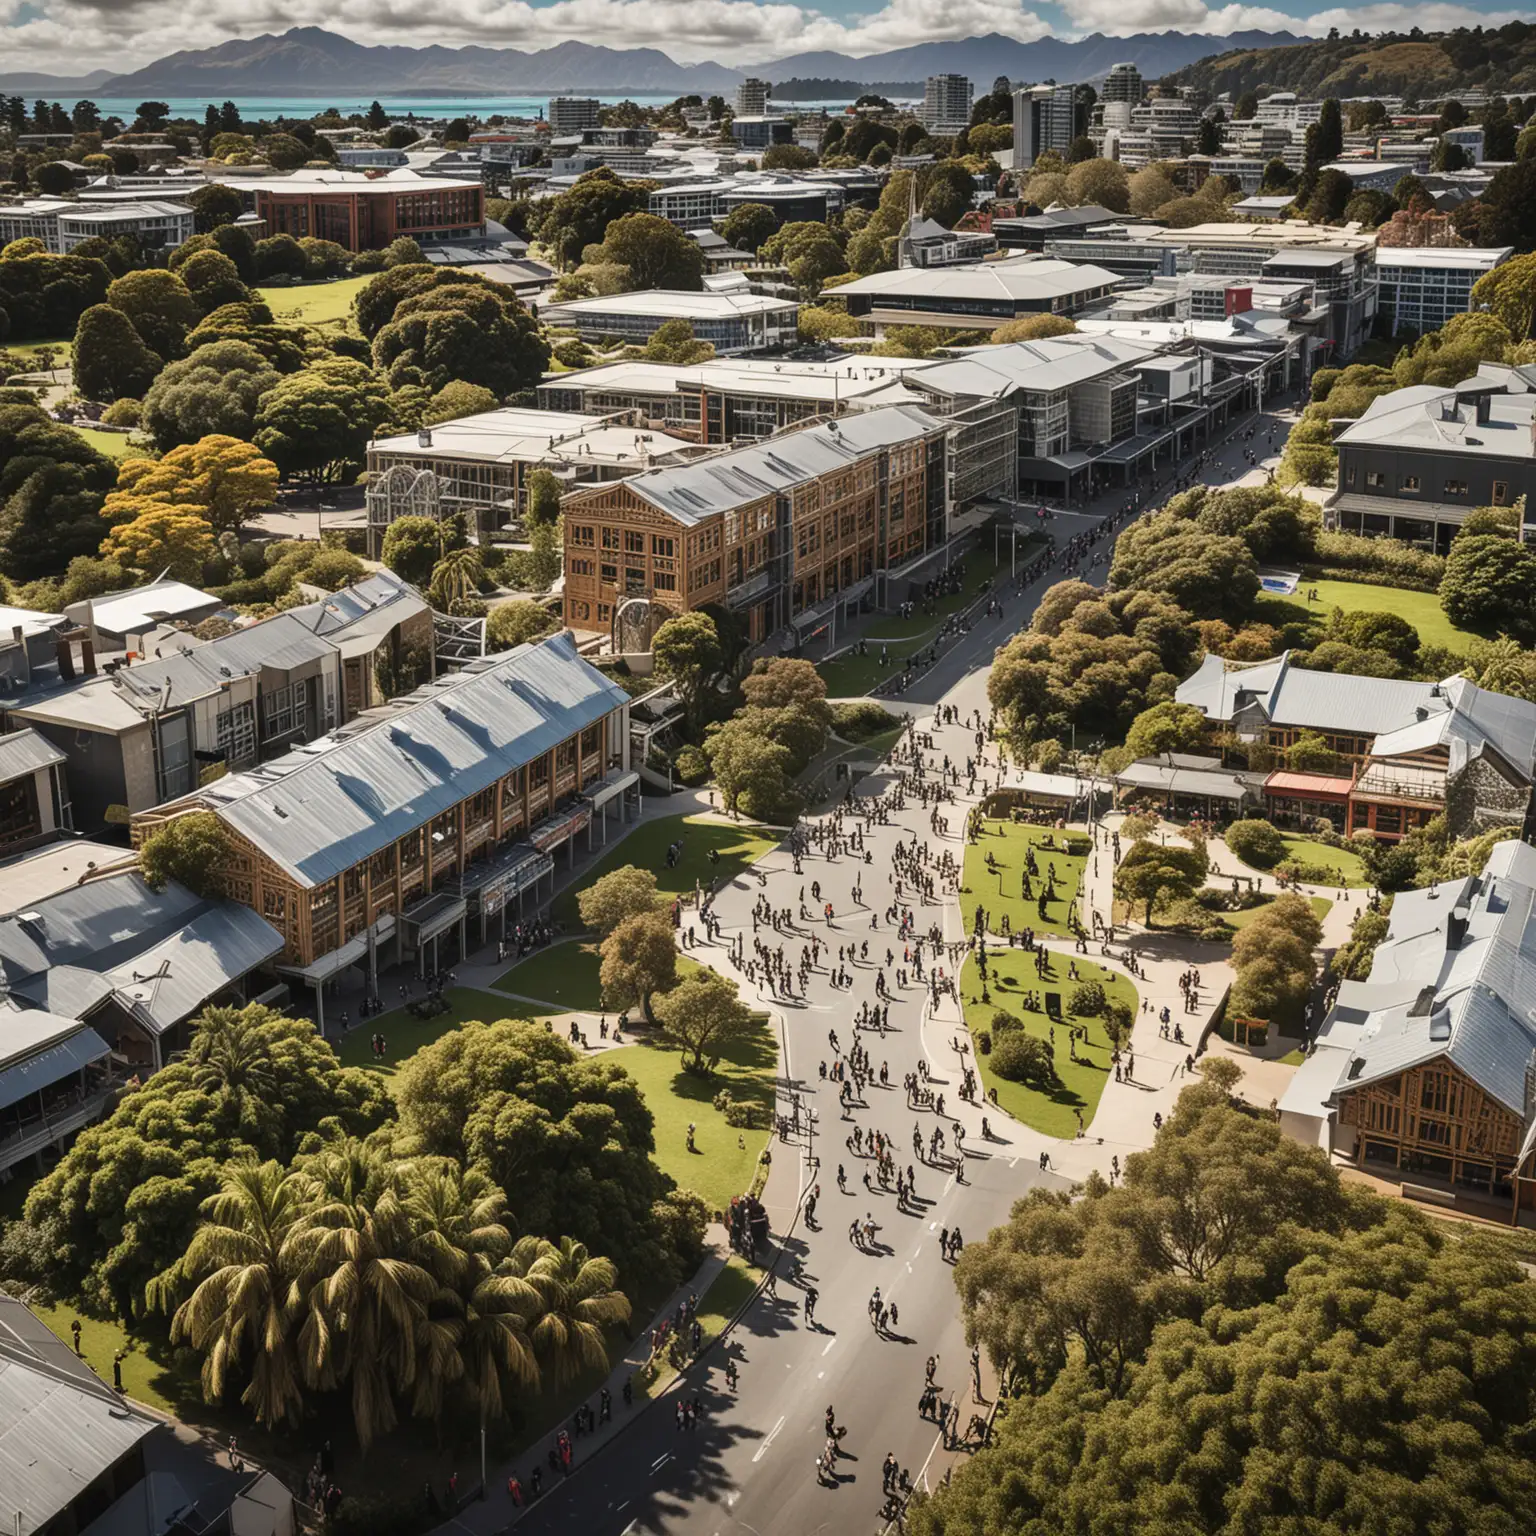 Bustling University Campus with Traditional Mori Architecture Elements in New Zealand